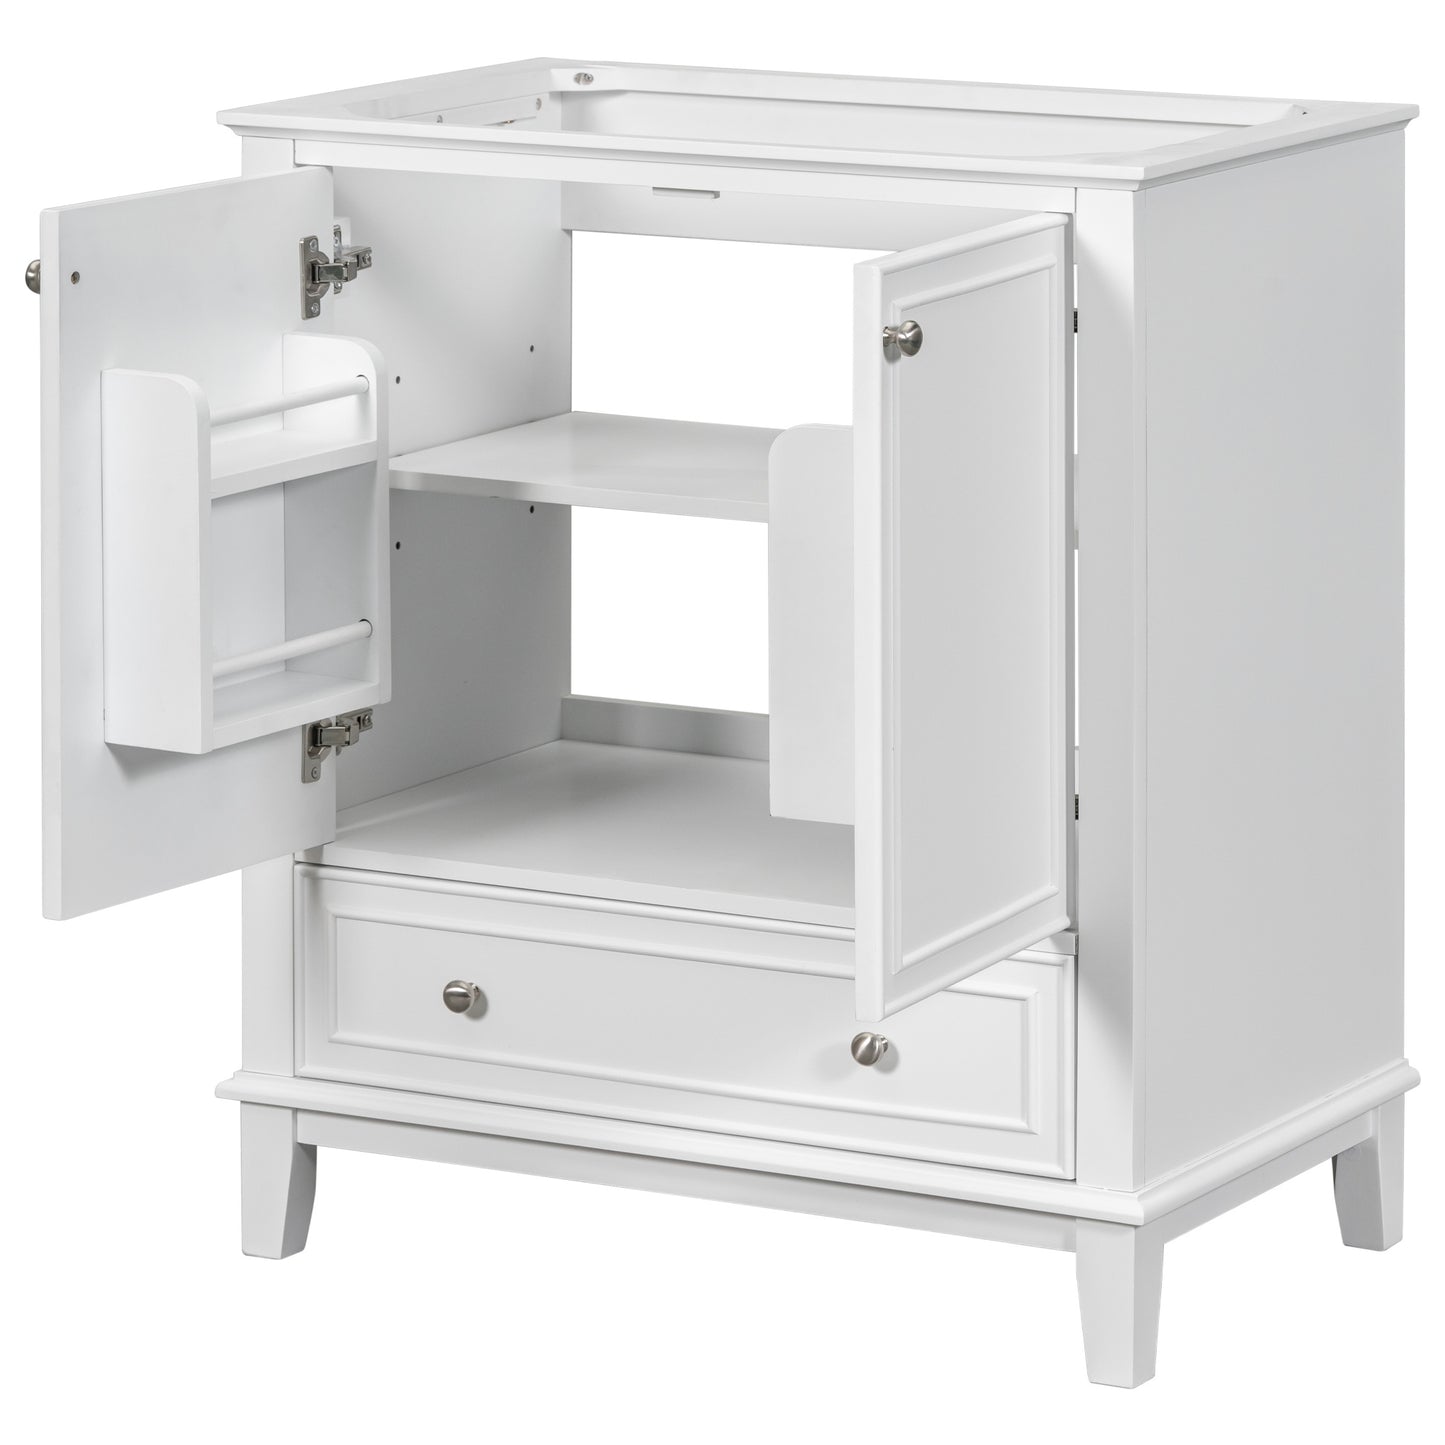 30" Bathroom Vanity without Sink, Base Only, Multi-functional Bathroom Cabinet with Doors and Drawer, Solid Frame and MDF Board, White